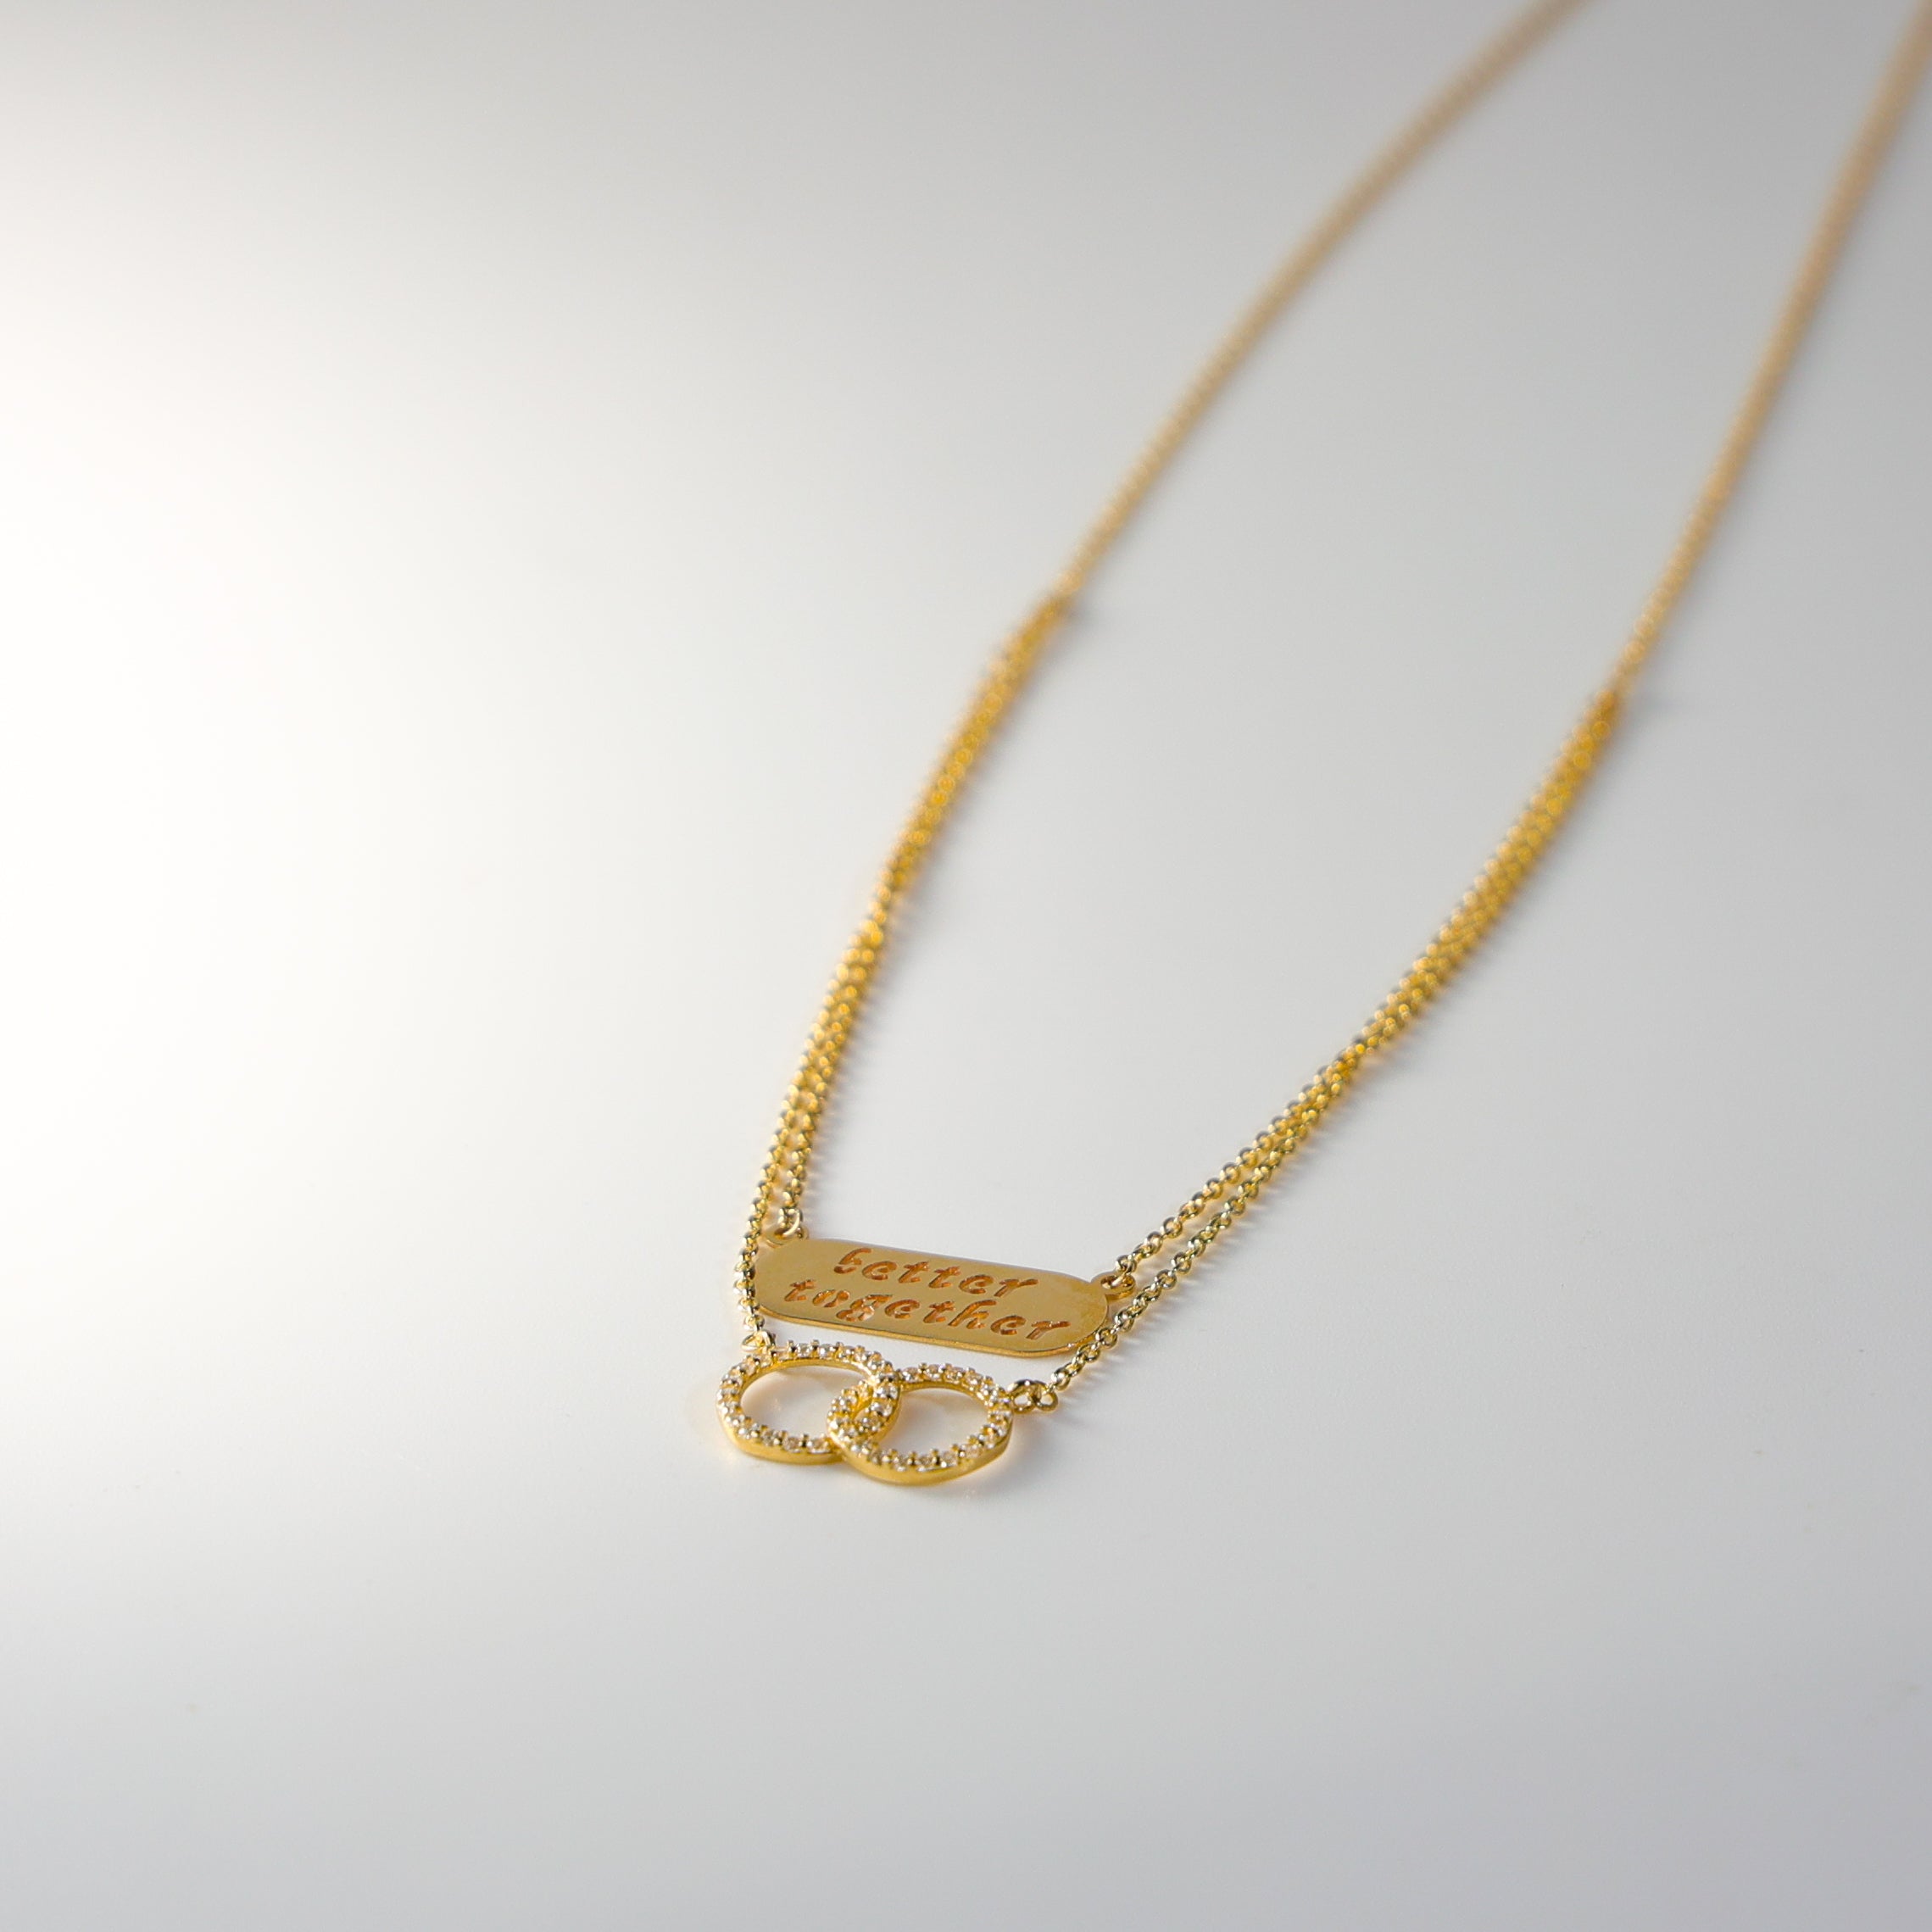 Gold Better Together Eternity Necklace Model-NK0315 - Charlie & Co. Jewelry